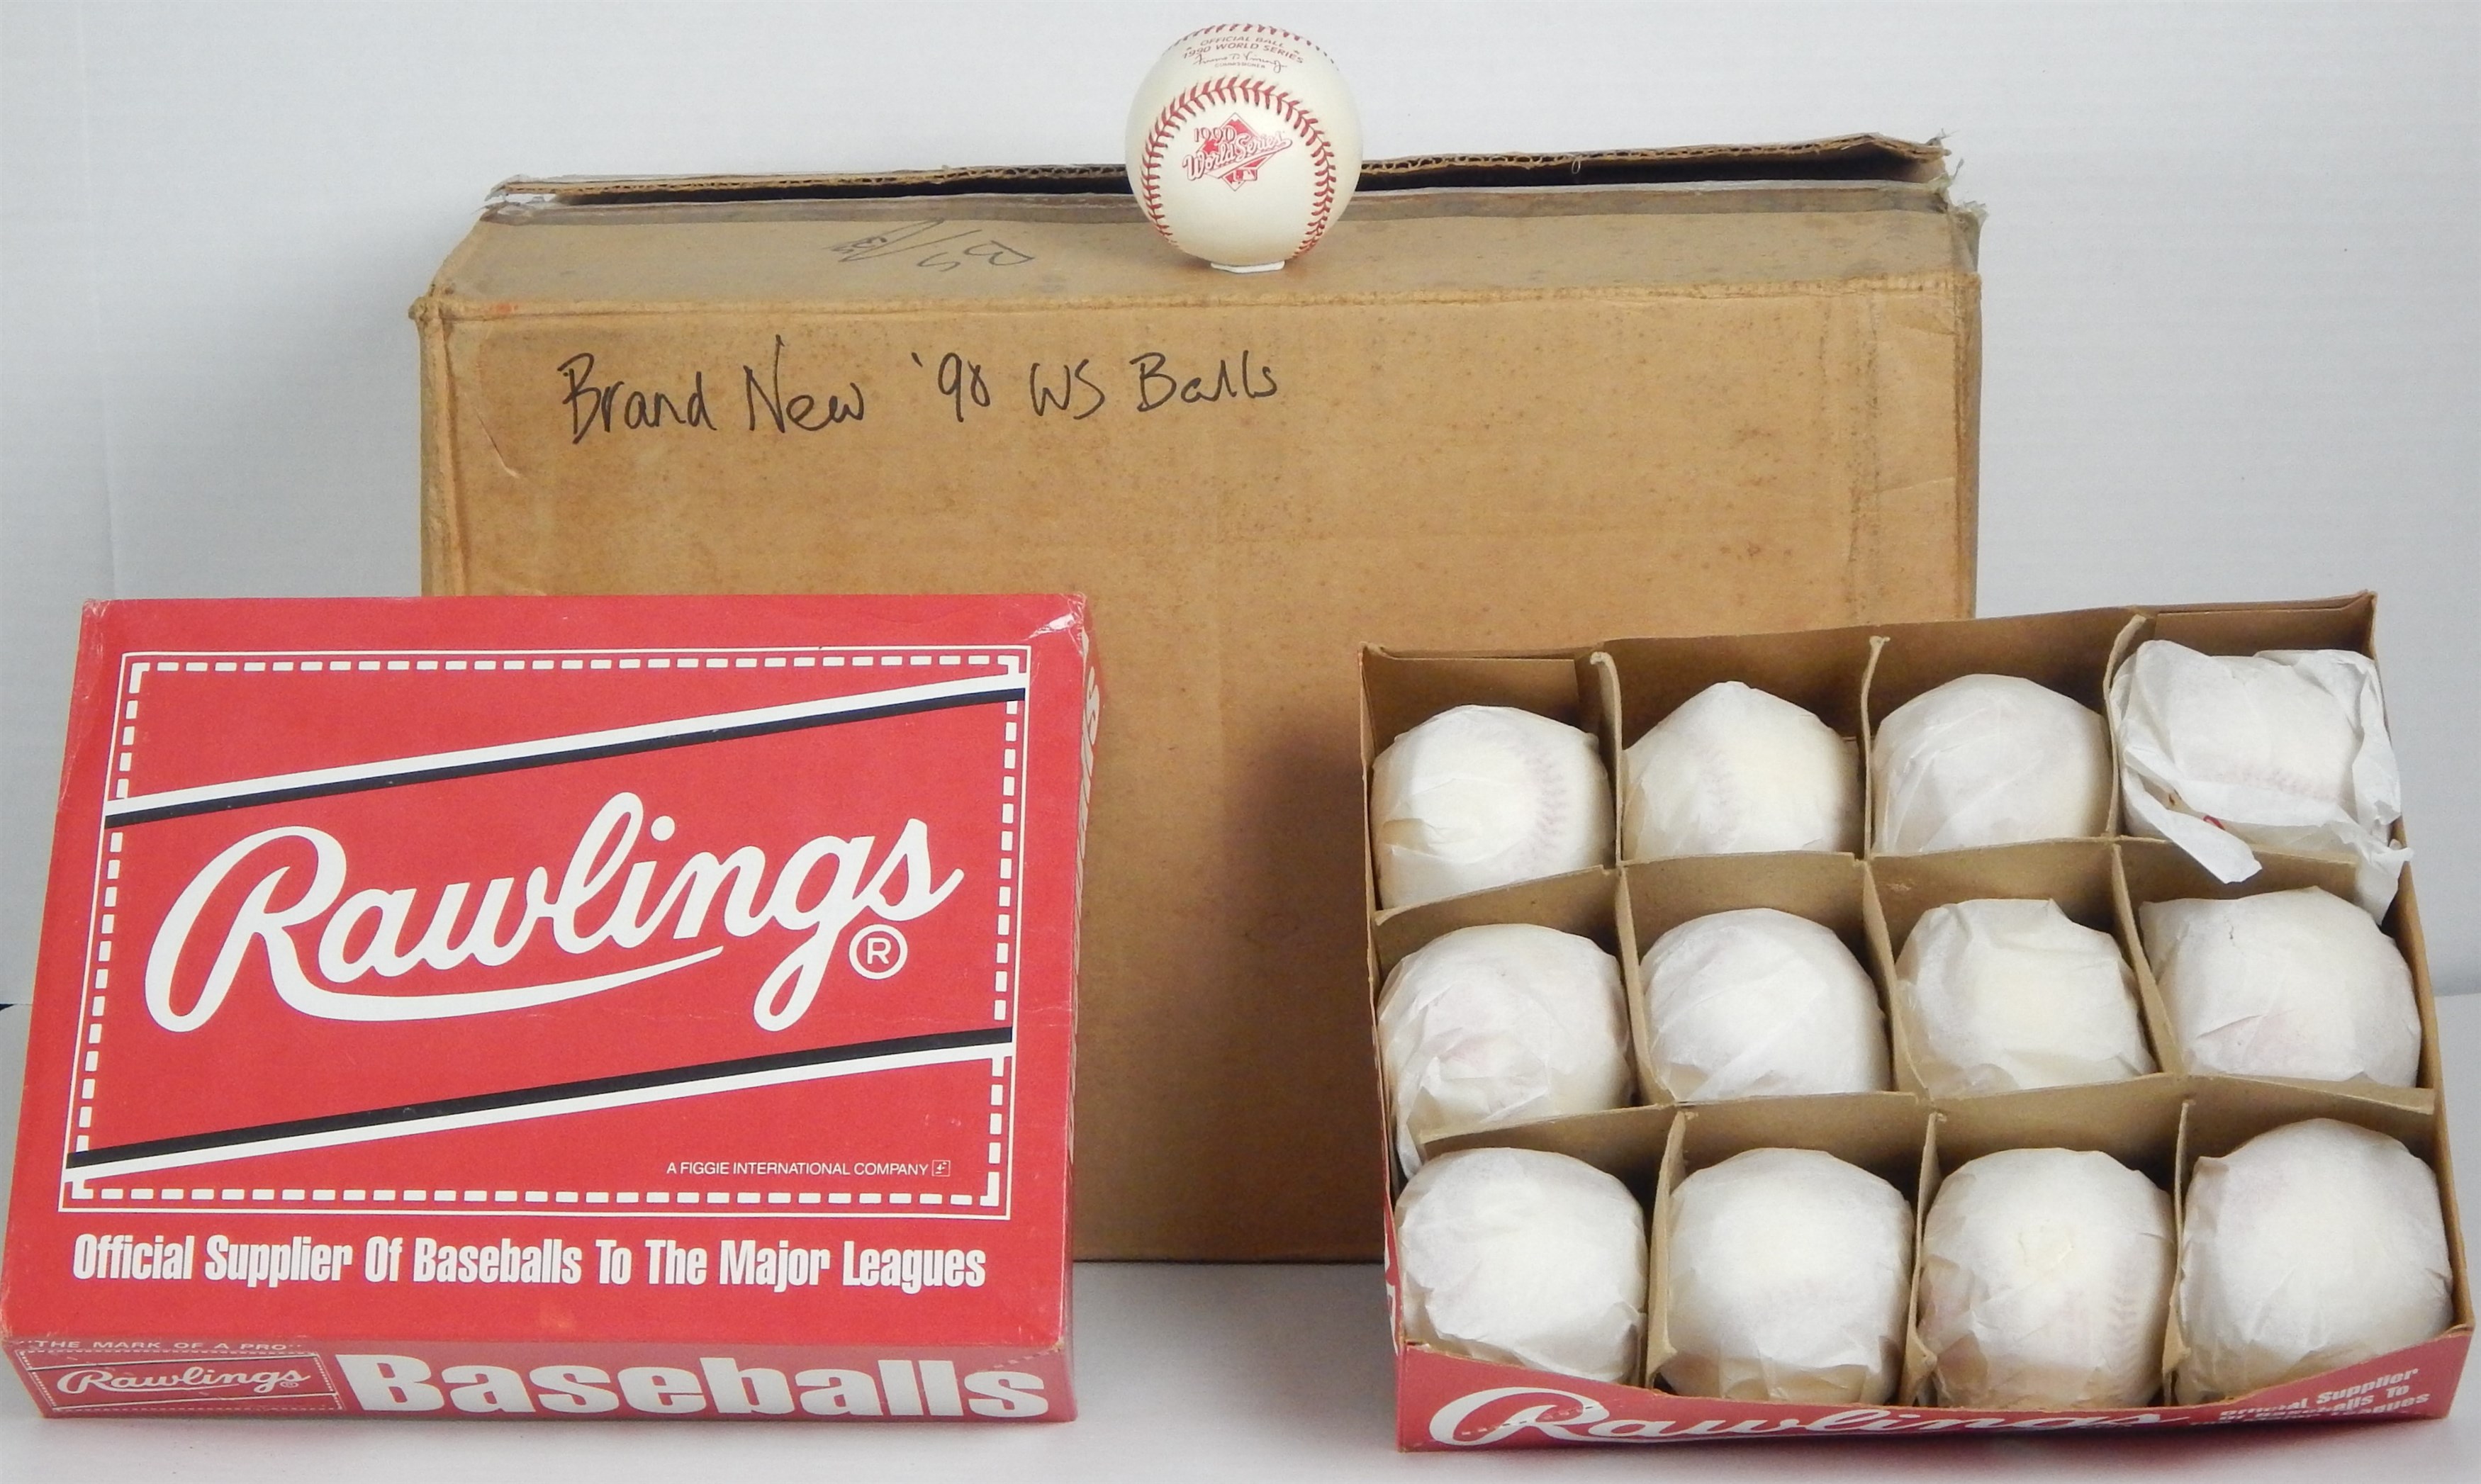 1990 World Series Case of Baseballs From The Bernie Stowe Collection